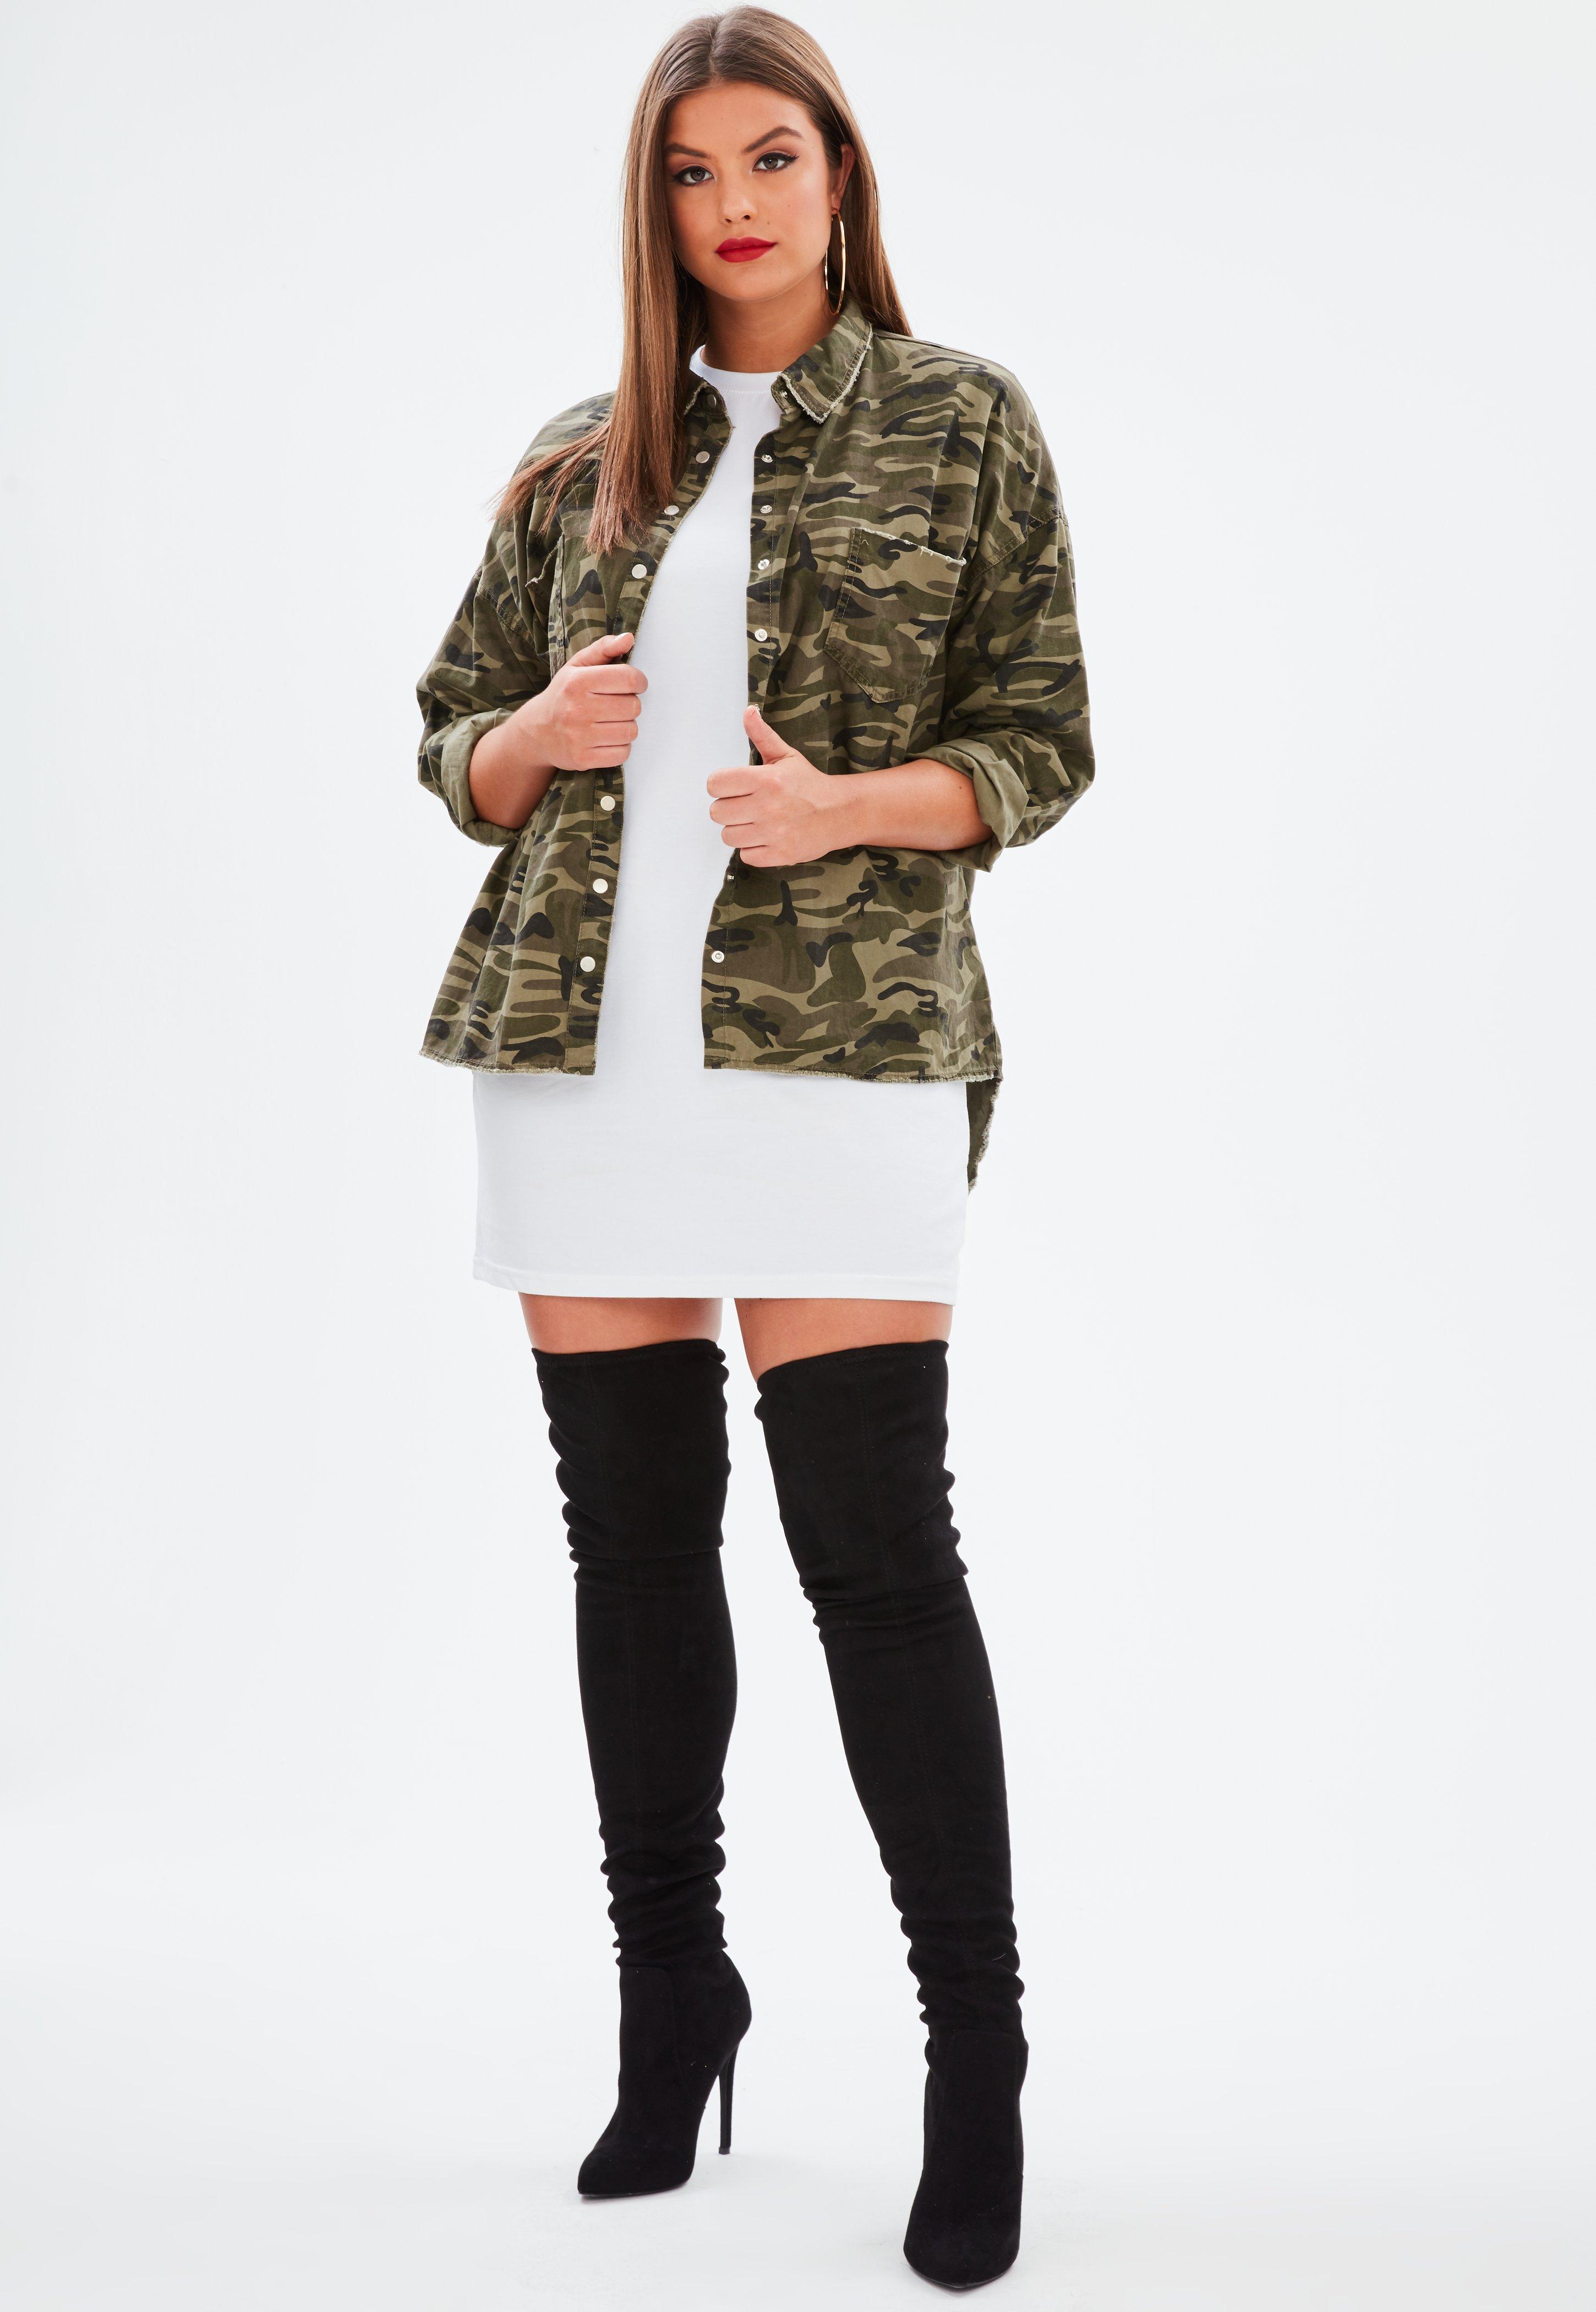 Quiz buzzfeed t shirt dress with thigh high boots cool